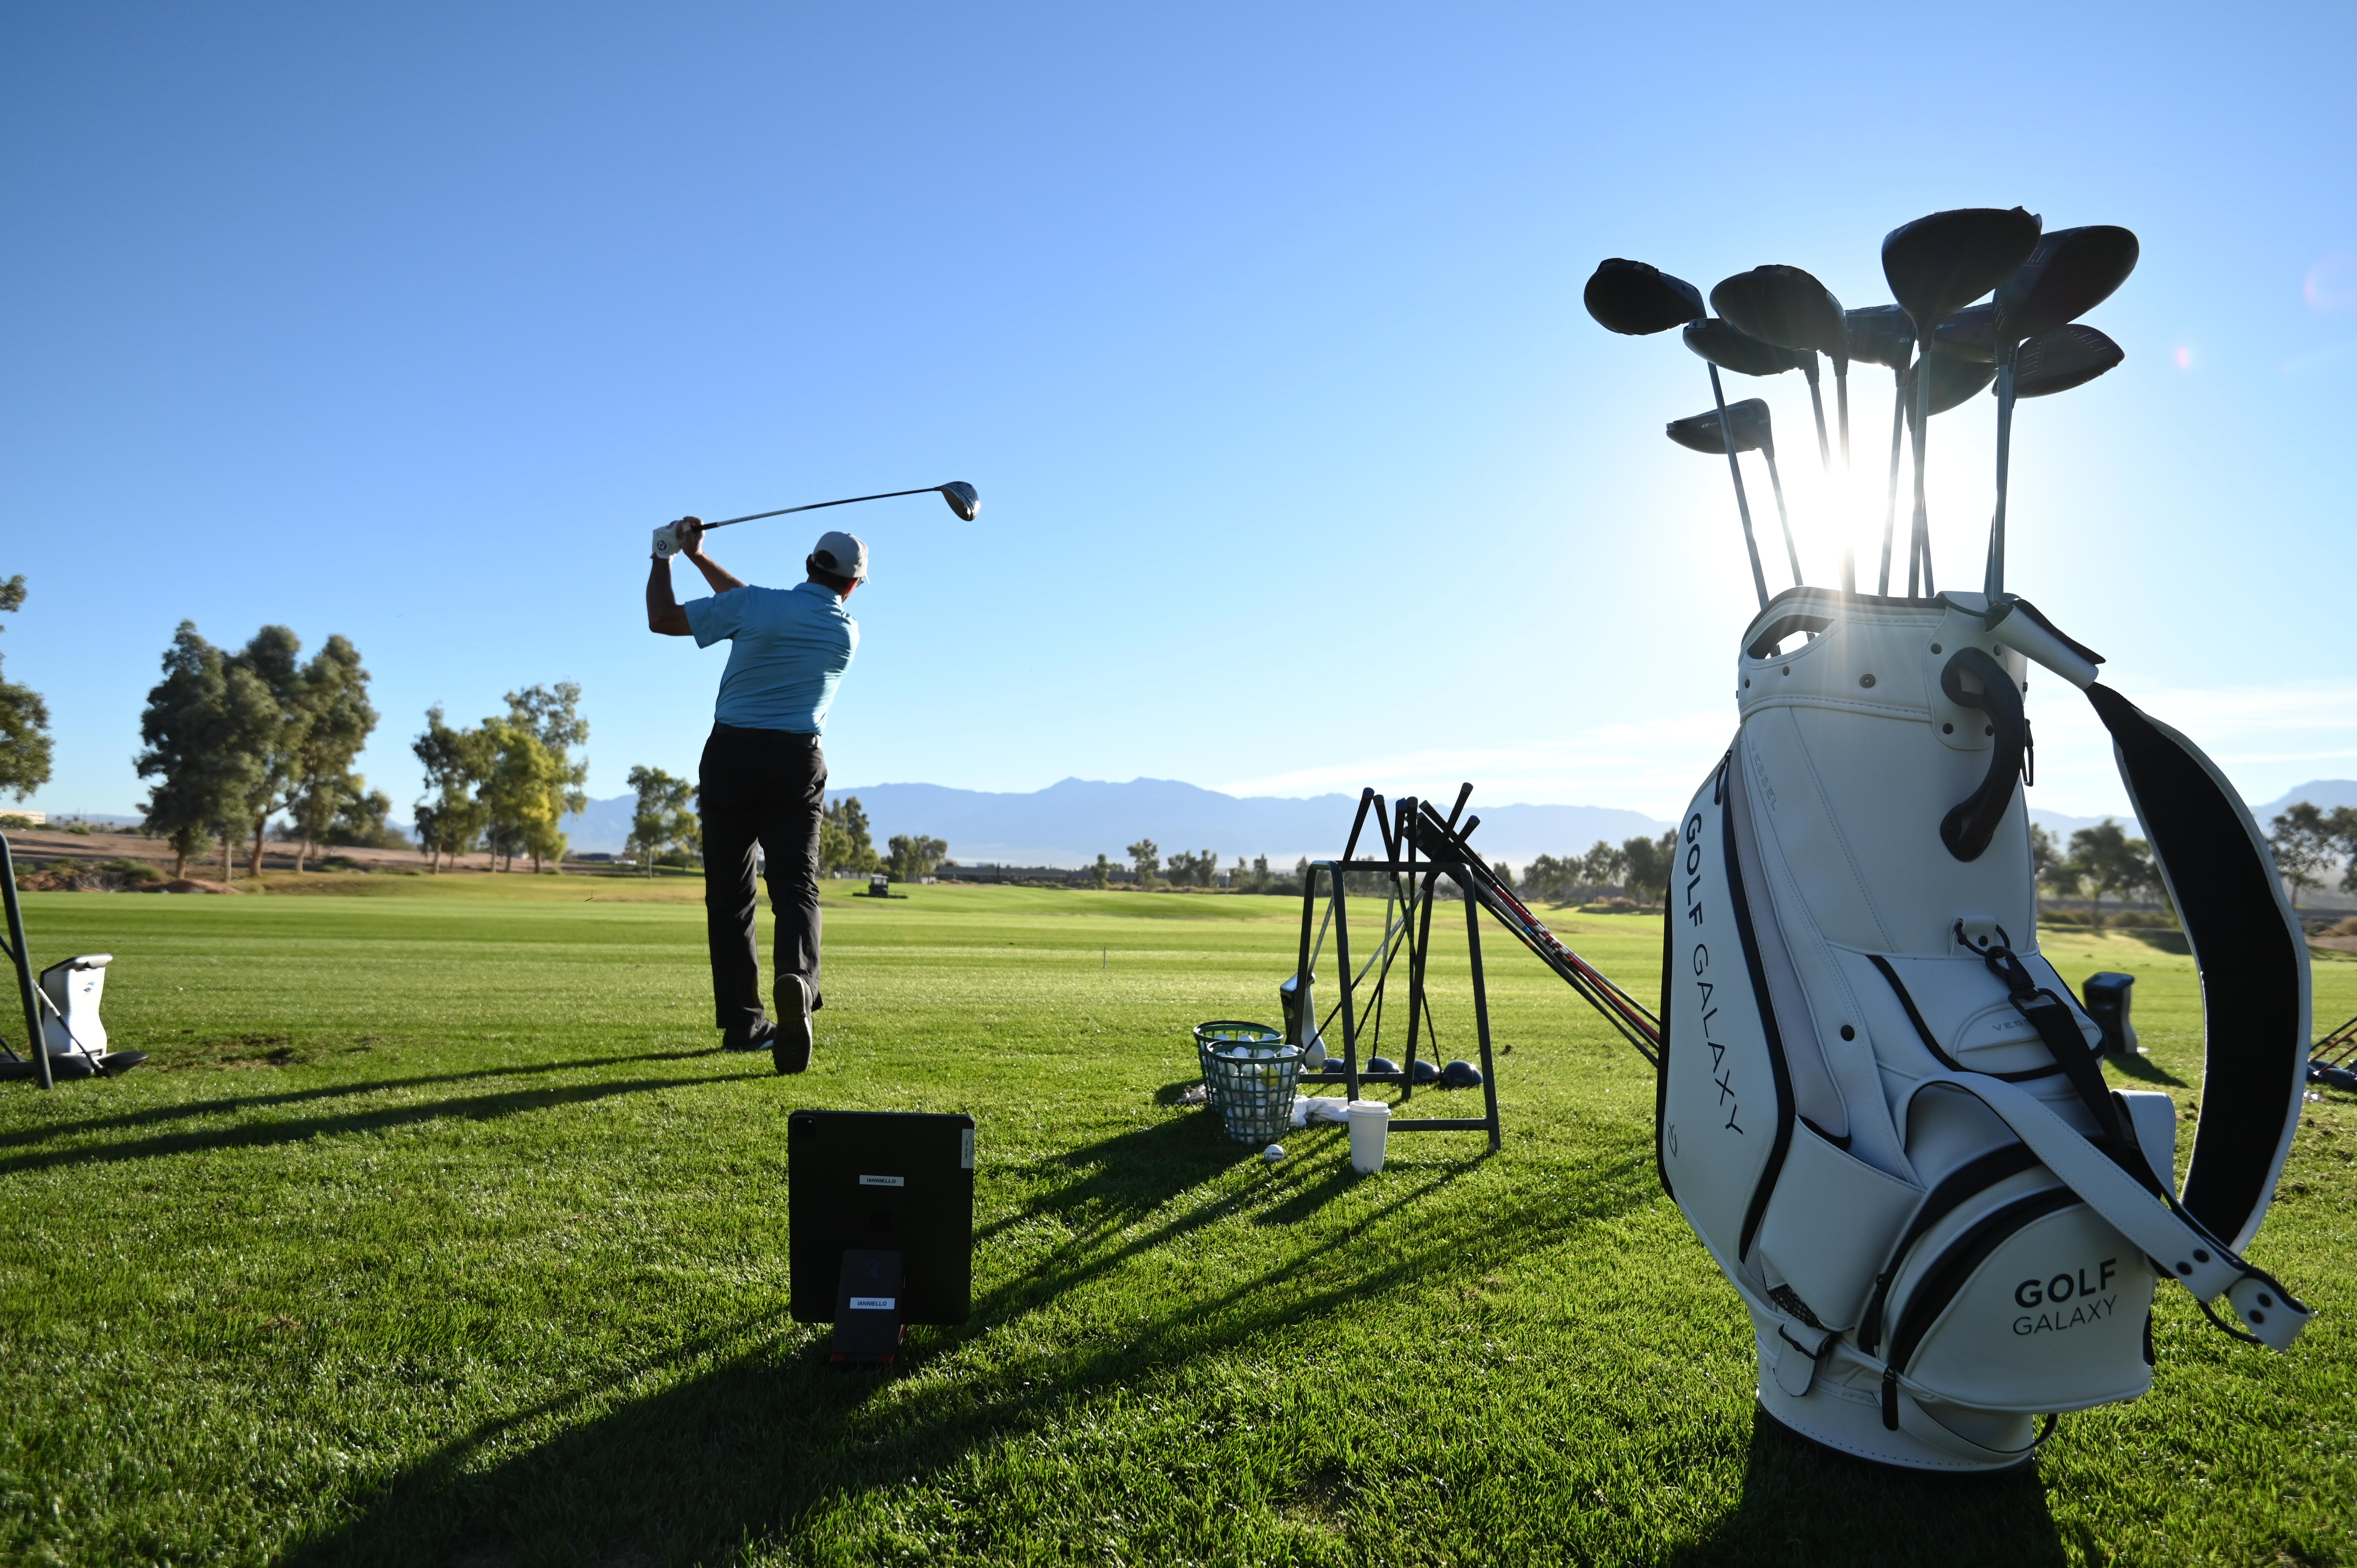 Vessel Sunday III Golf Bag Review - Plugged In Golf